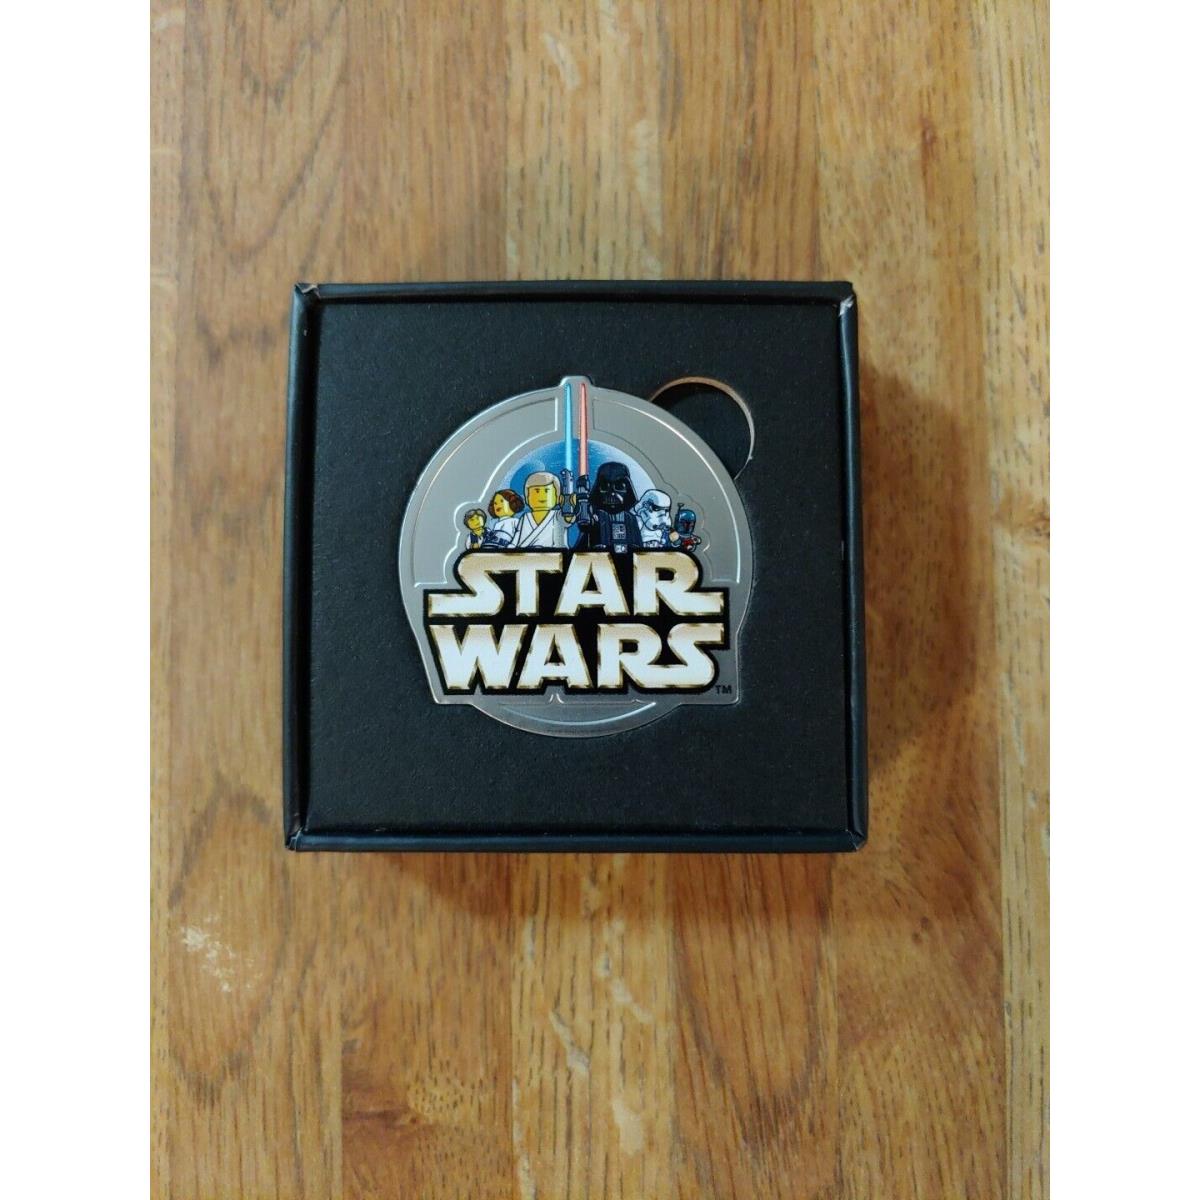 Lego Star Wars Insiders 25th Anniversary Logo Coin 5008899 Limited